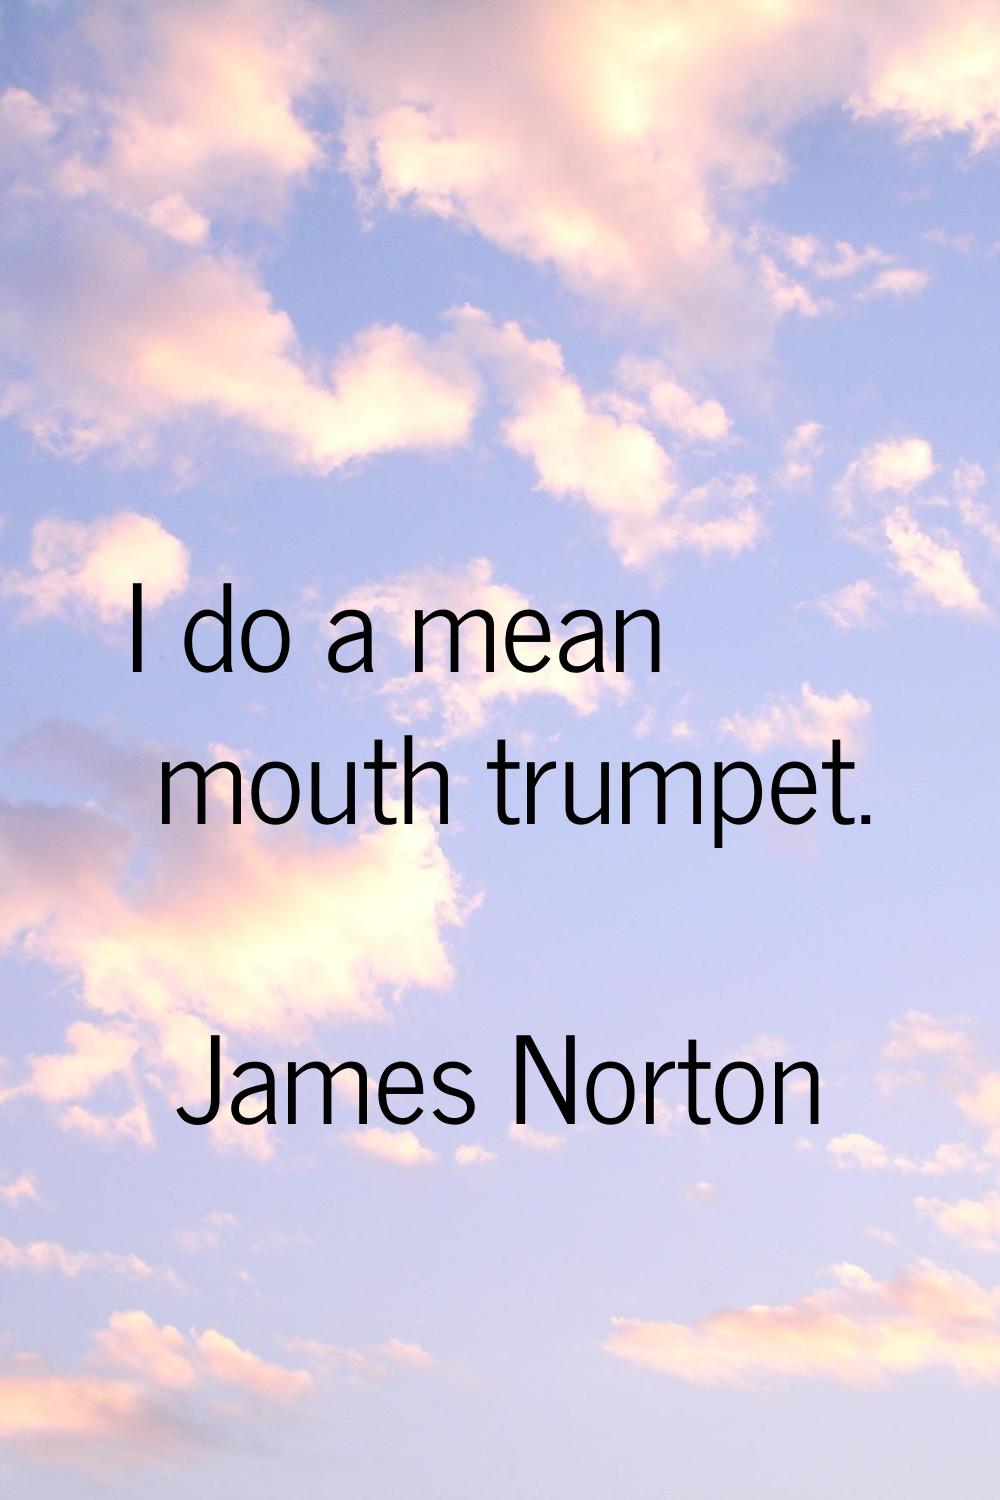 I do a mean mouth trumpet.